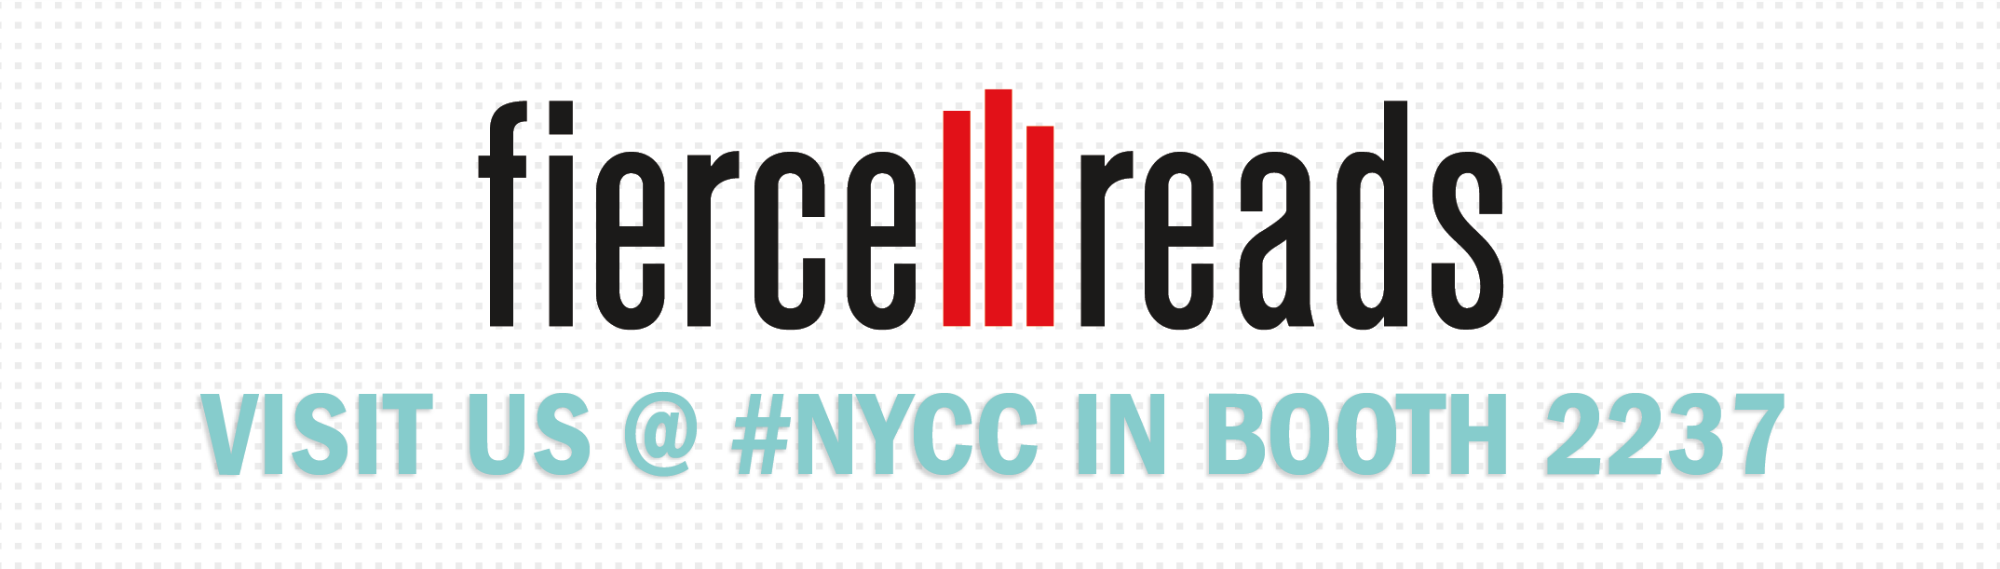 Fierce Reads at #NYCC2017!